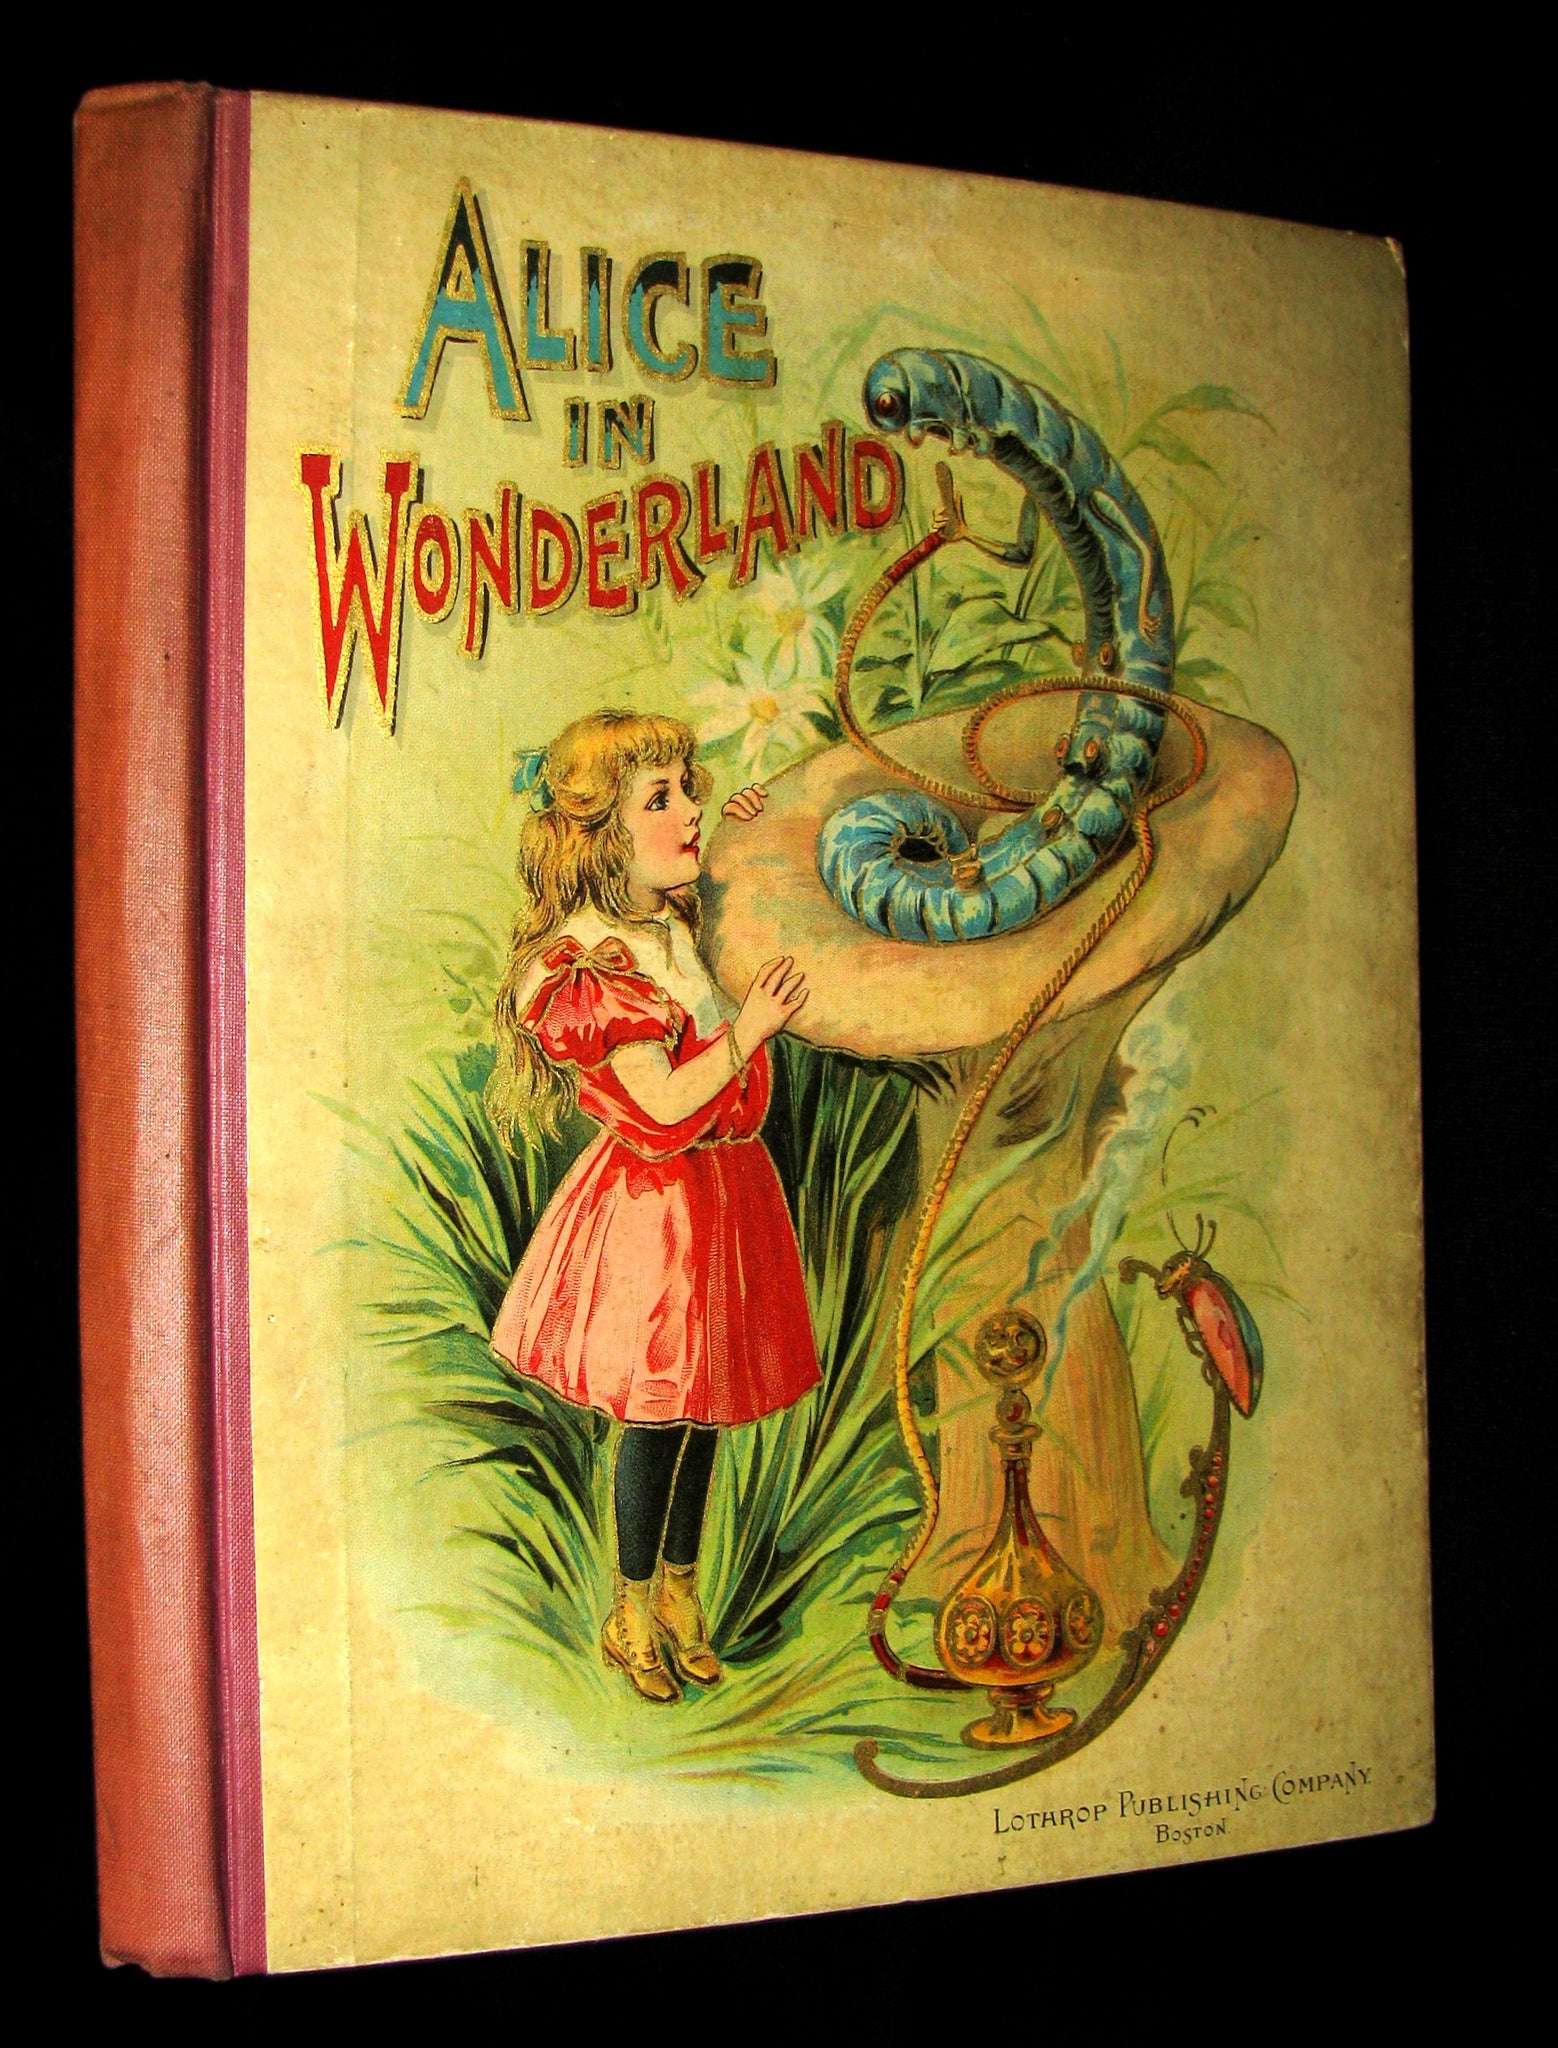 1898 Very Rare Victorian Book - Alice's Adventures in Wonderland published by Lothrop